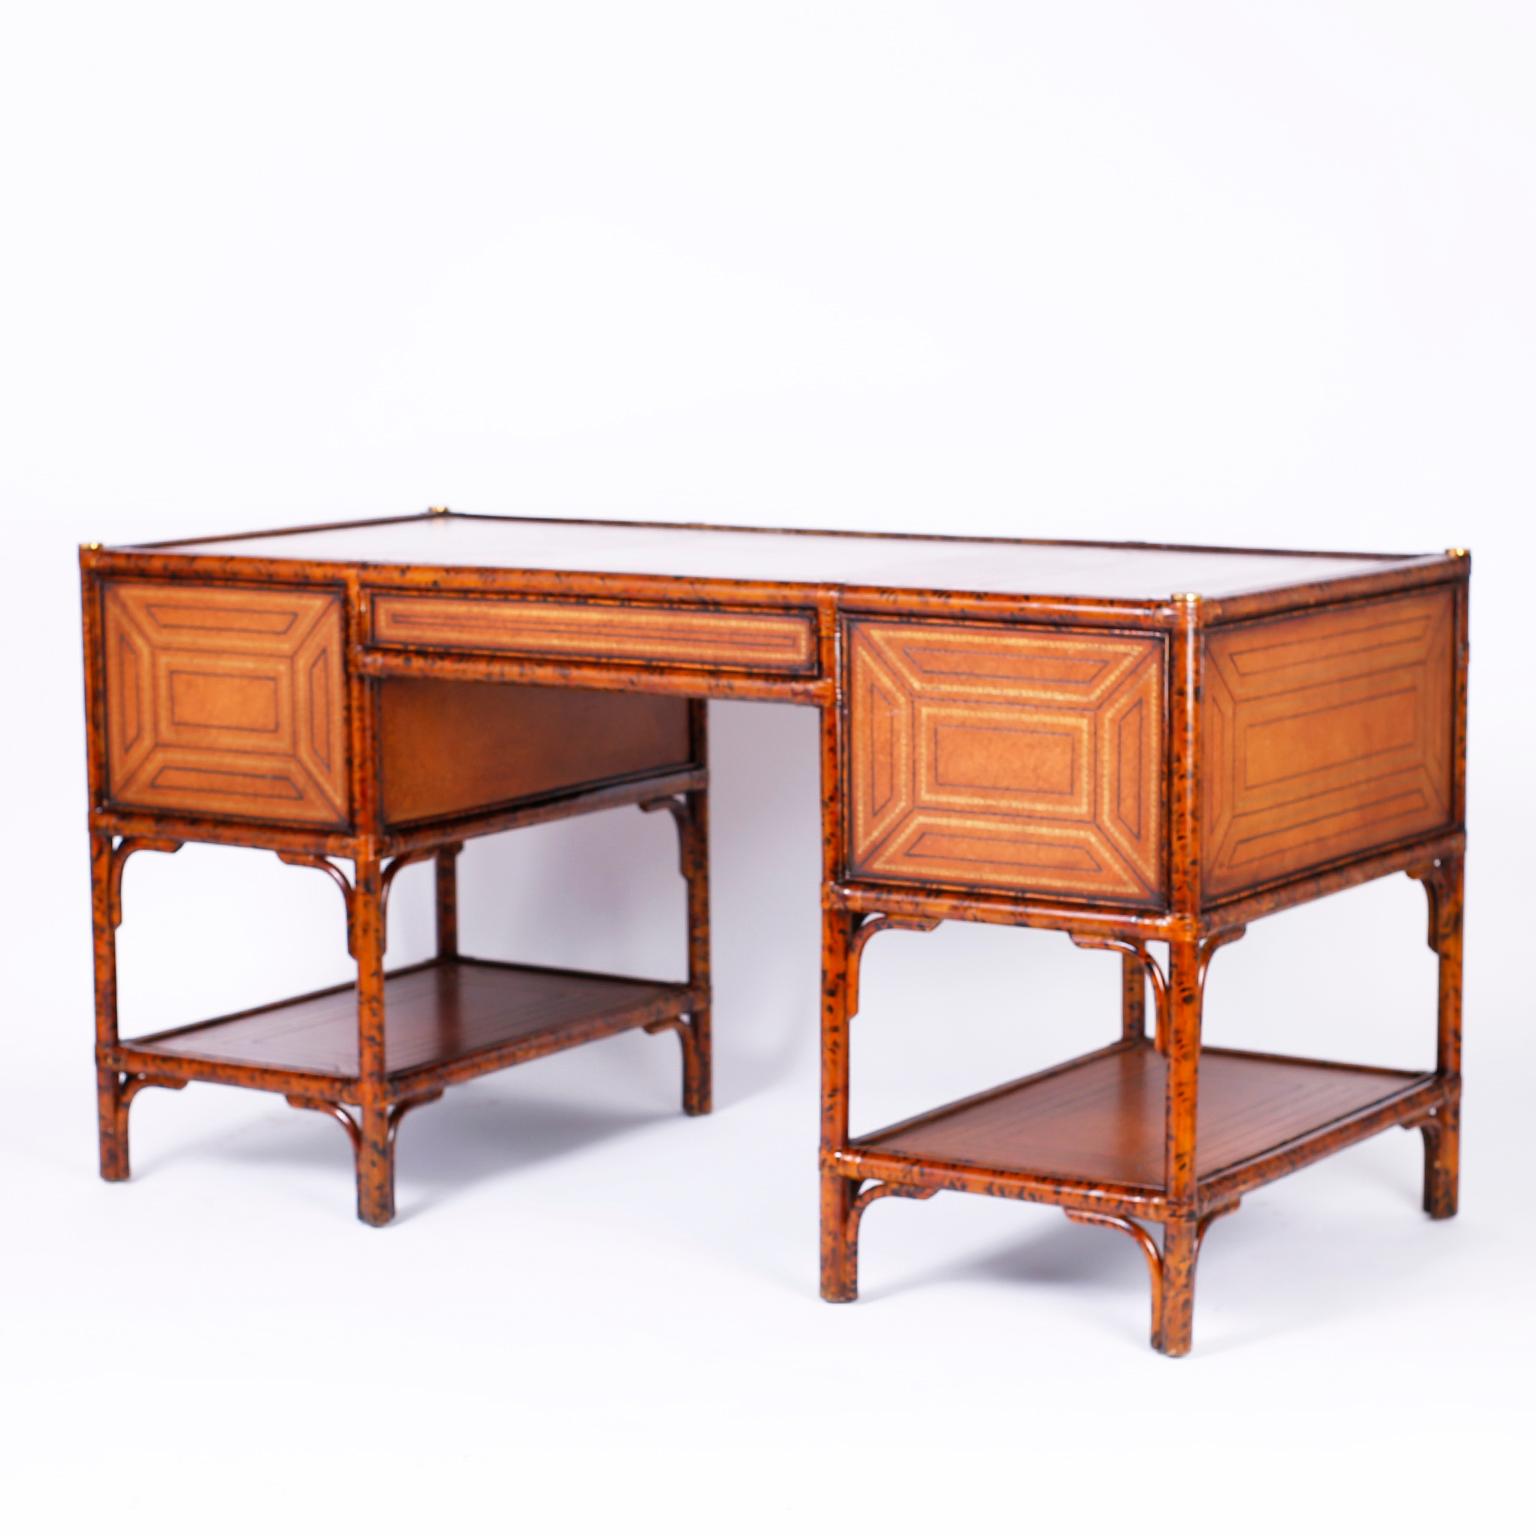 British Colonial Midcentury Faux Tortoise Leather Topped Desk by Maitland-Smith